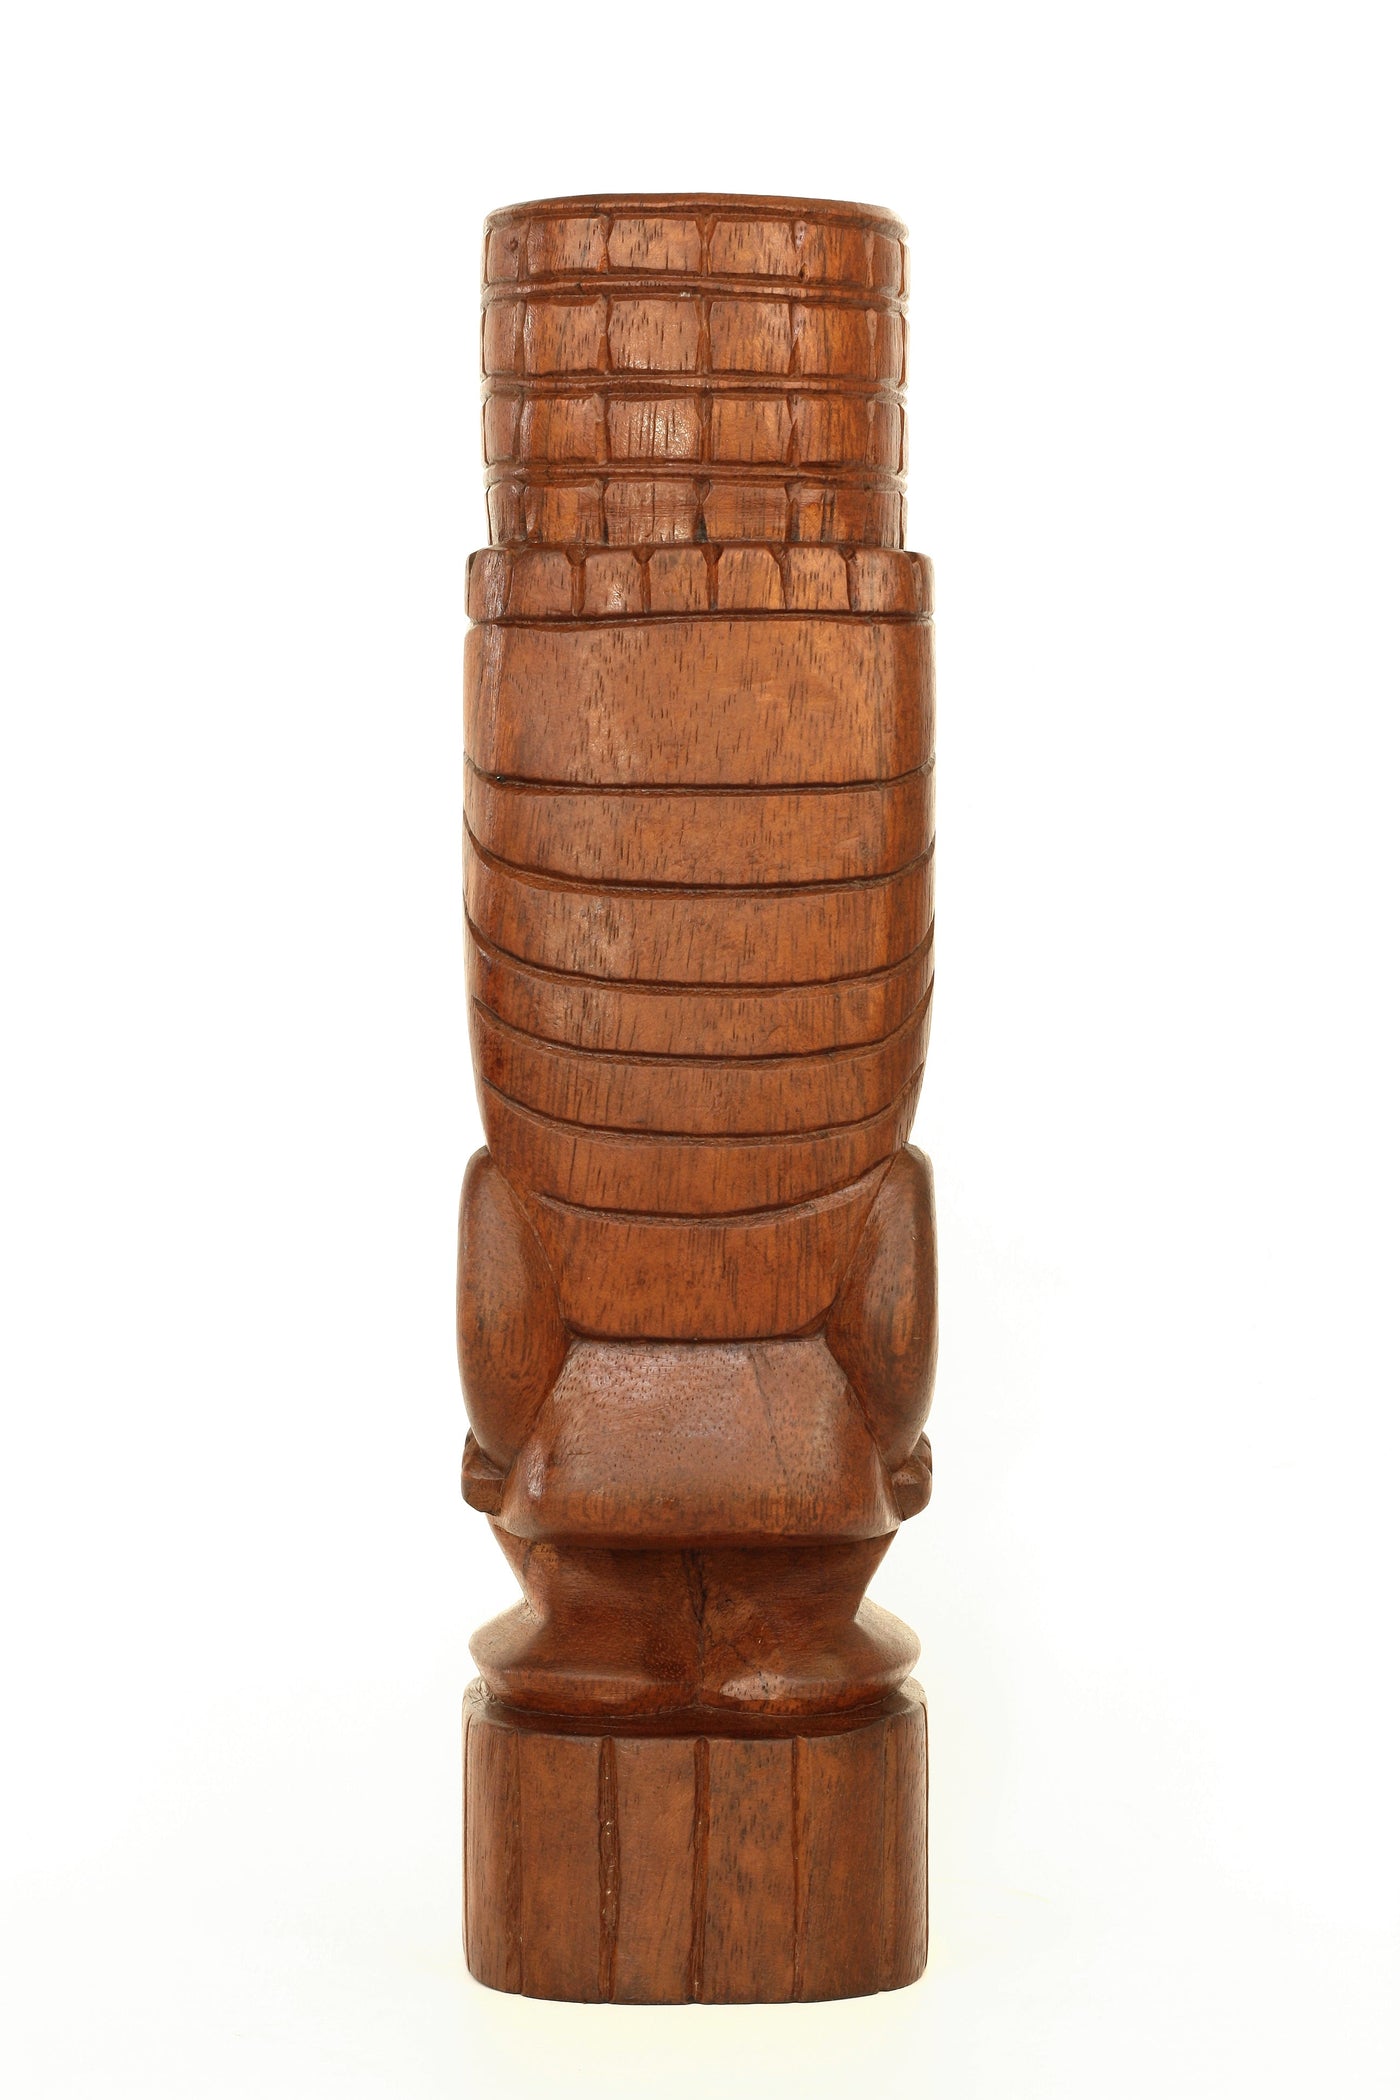 Handmade Wooden Primitive Big Mouth Tribal Statue Sculpture Tiki Bar Handcrafted Unique Gift Home Decor Accent Figurine Decoration Hand Carved Wood